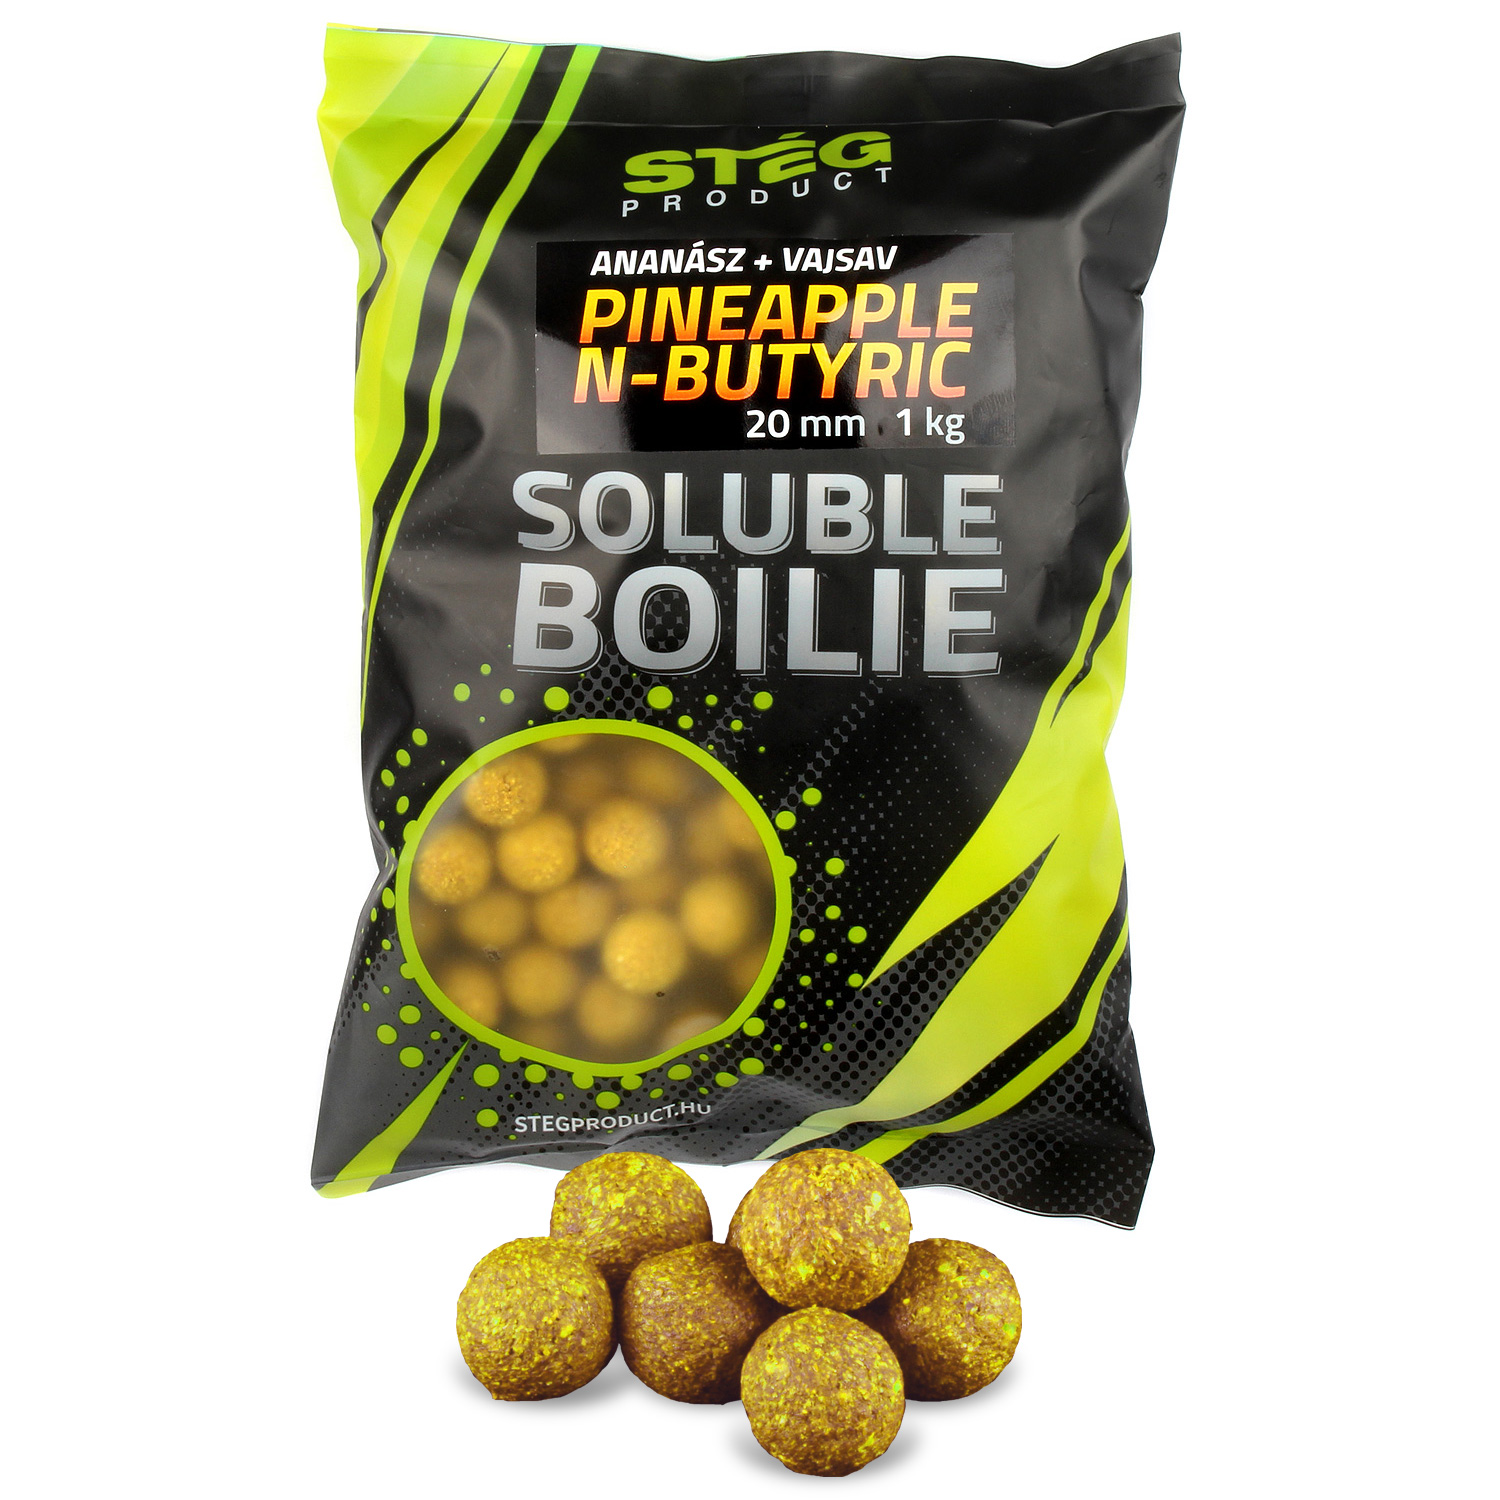 Stg Product Soluble Boilie 20mm Pineapple-N-Butyric 1kg